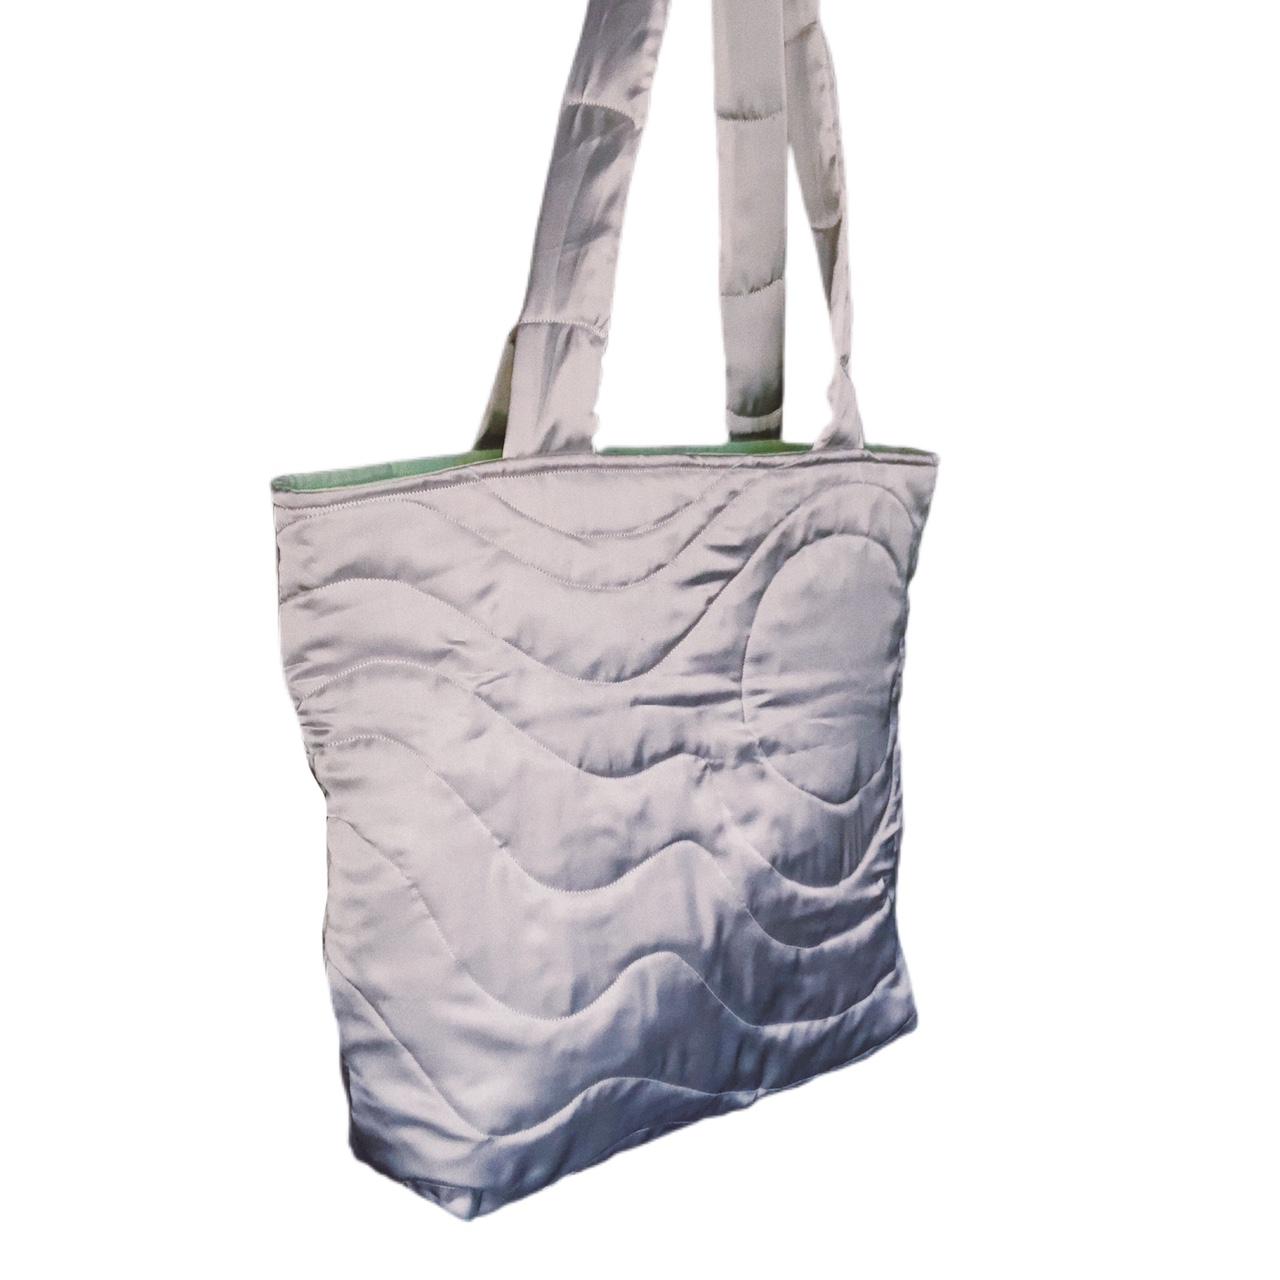 Women's Silver and Green Bag (2)